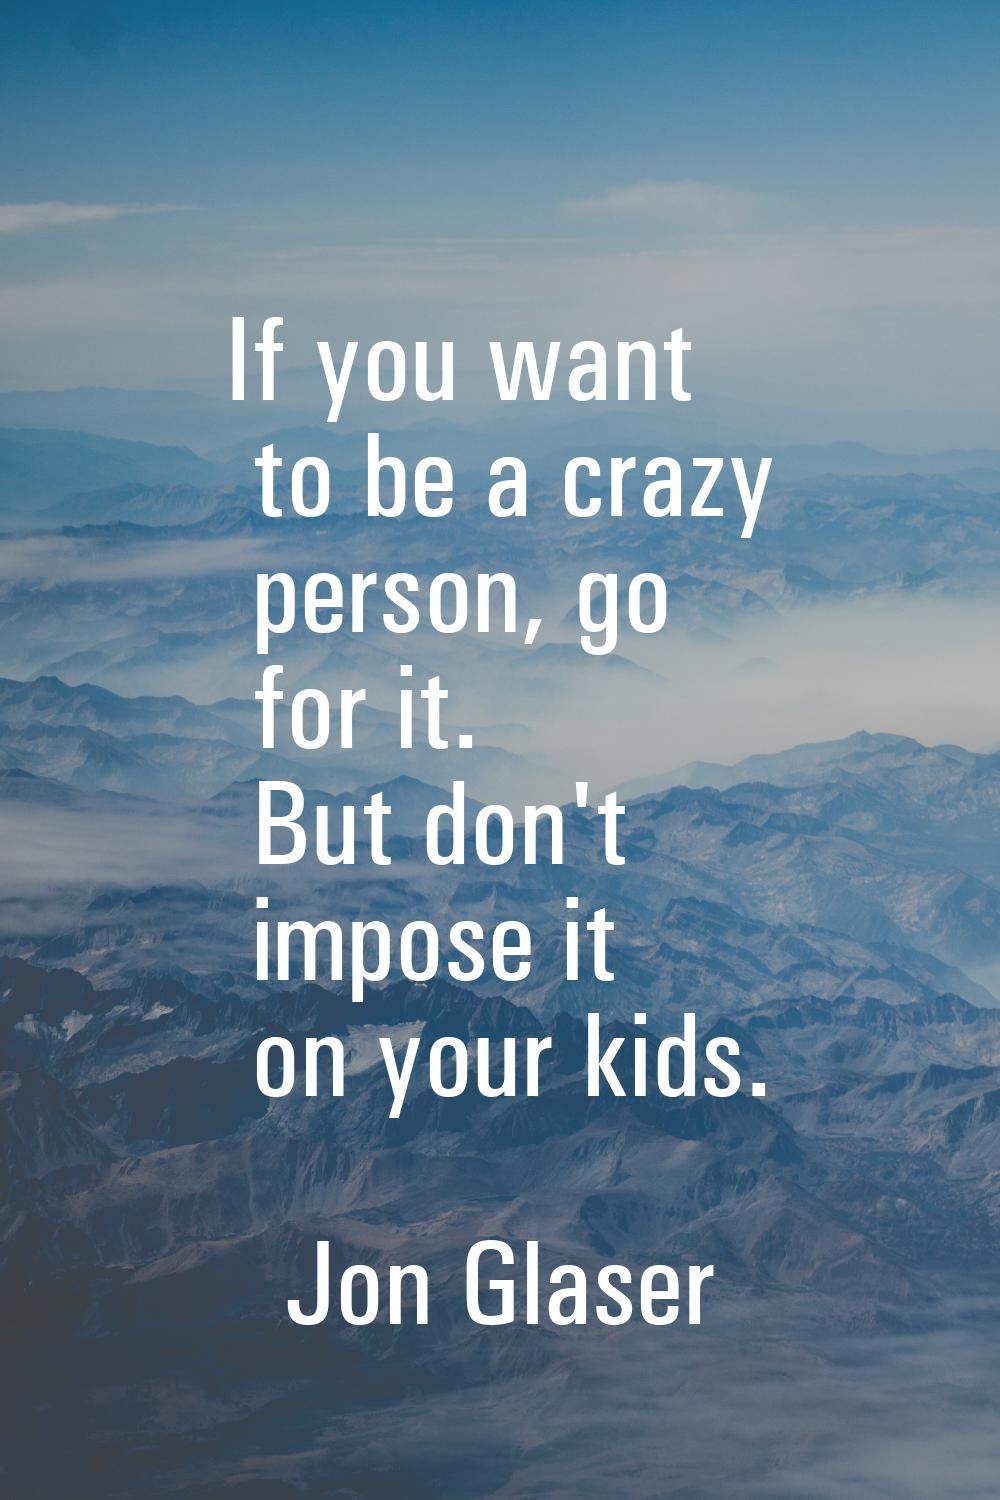 If you want to be a crazy person, go for it. But don't impose it on your kids.